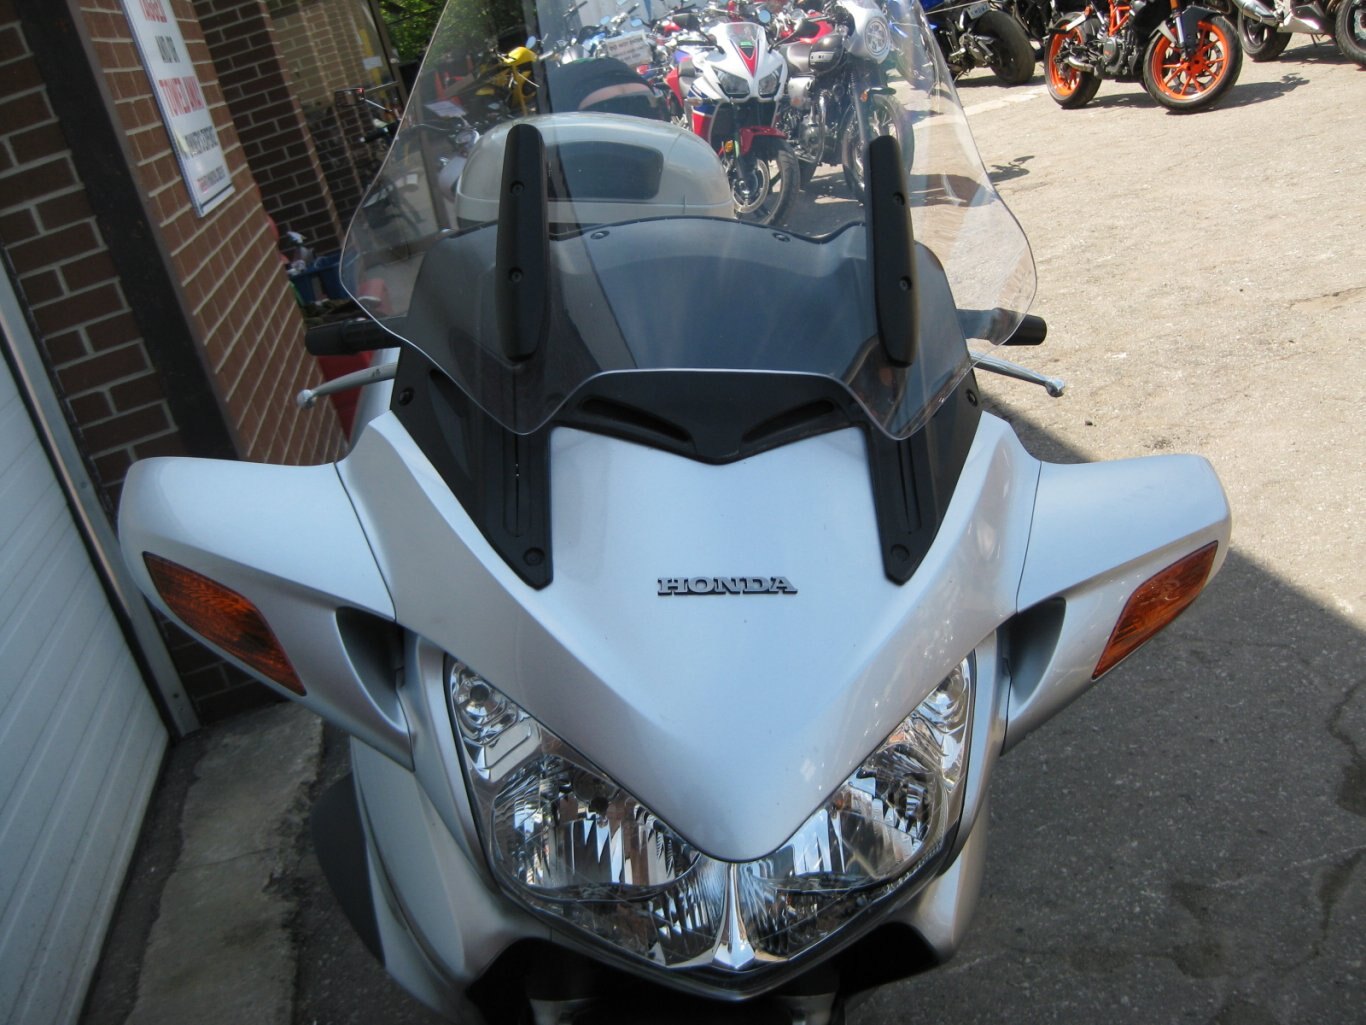 2007 Honda ST1300ABS SOLD CONGRATULATIONS GARY, WELCOME TO THE WORLD OF COMFORT ON YOUR NEW SPORT TOURING!!